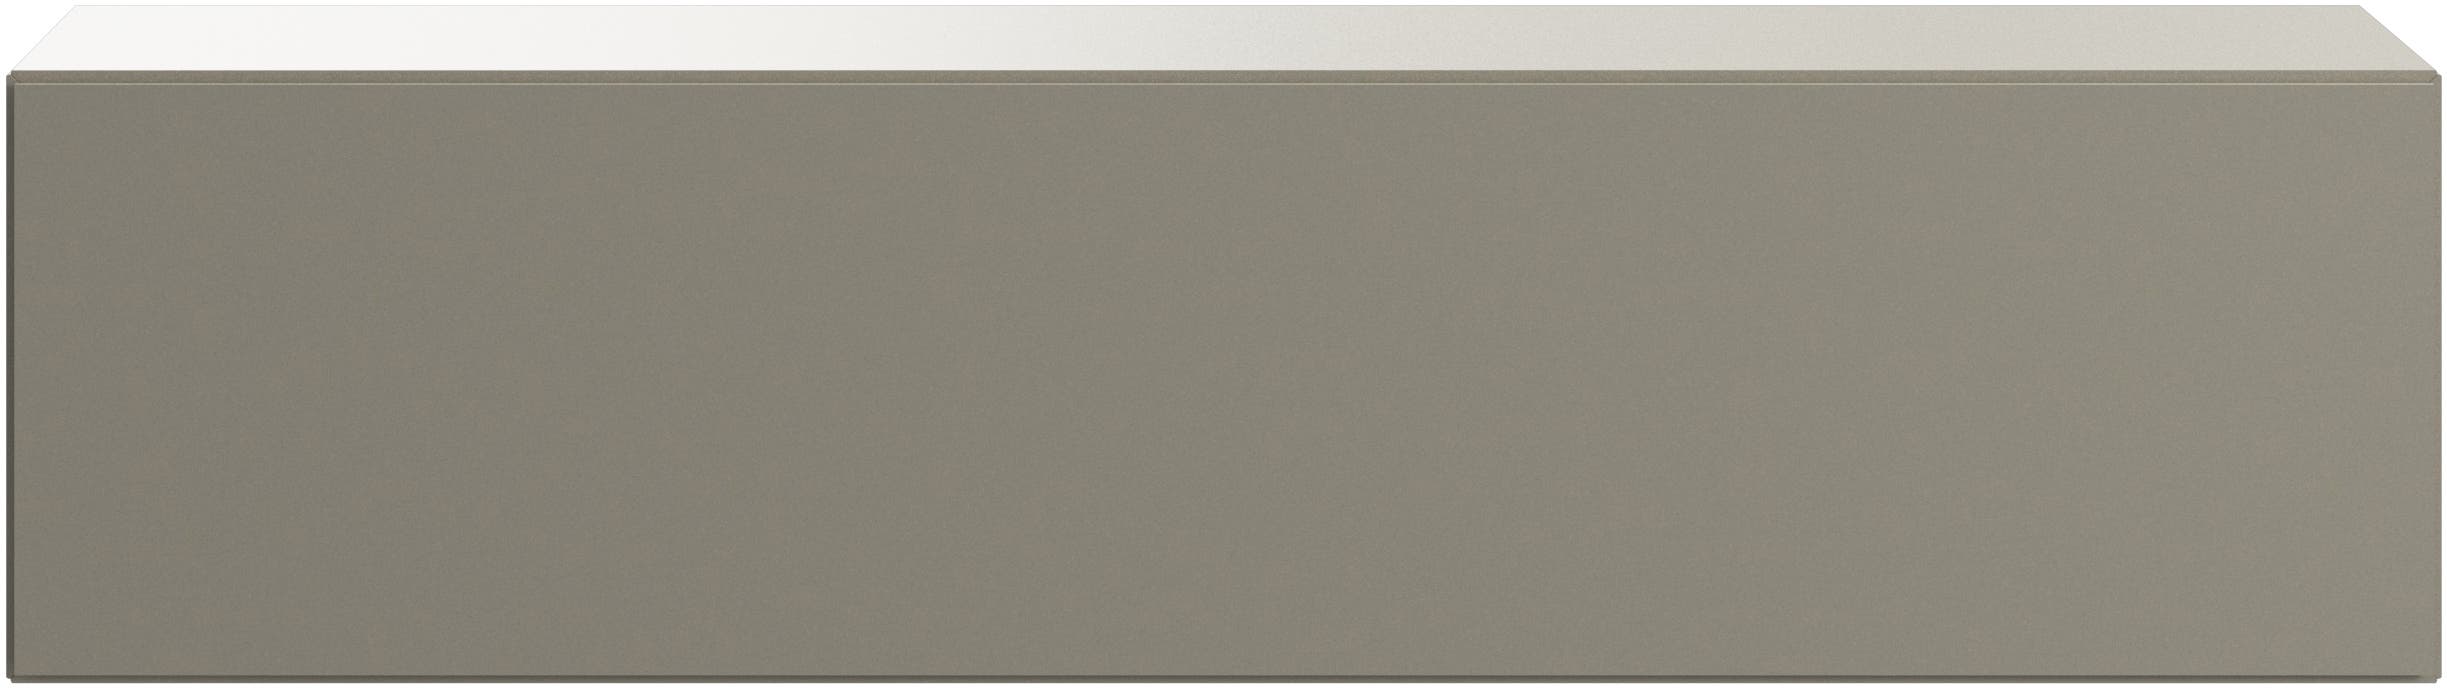 Lugano wall mounted cabinet with drop-down door